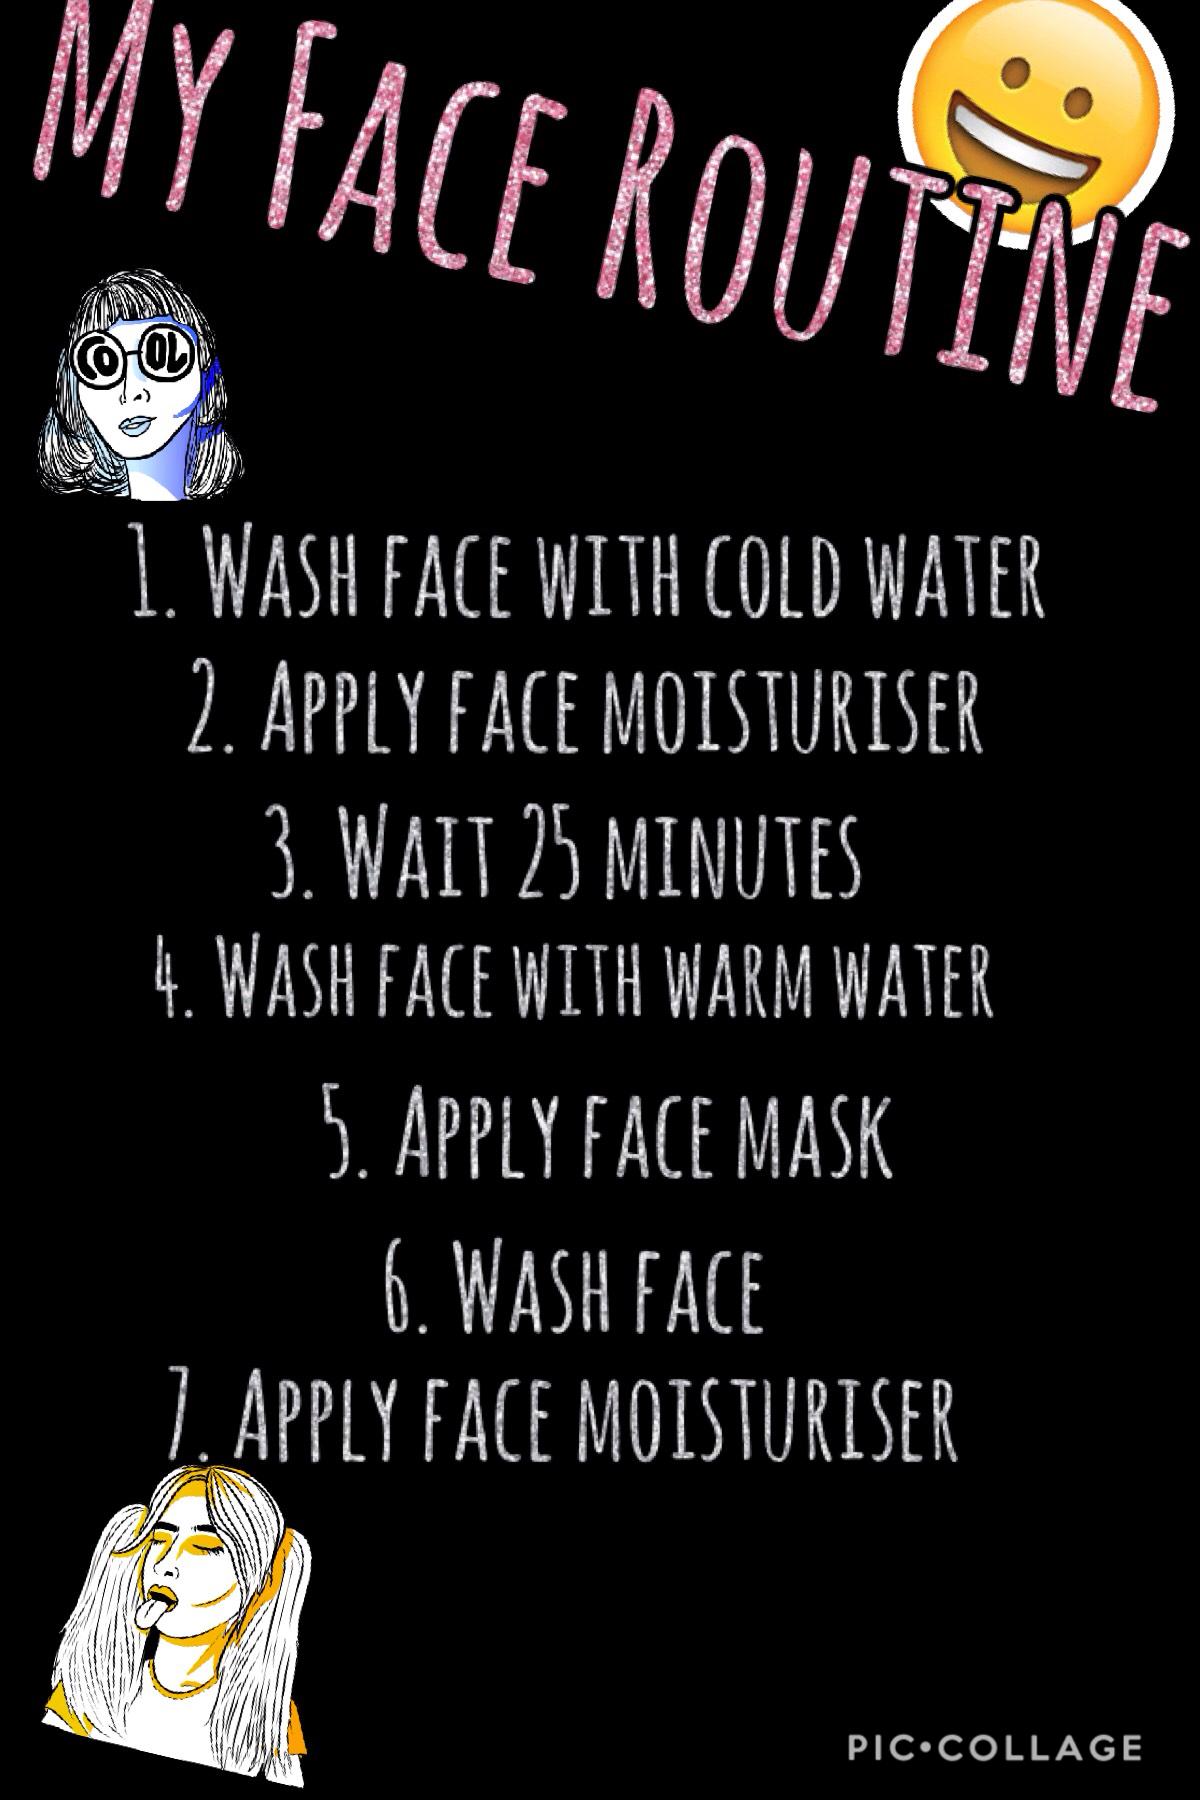 MY FACE ROUTINE 😊😄😀😆😋😃🤗😝😛
